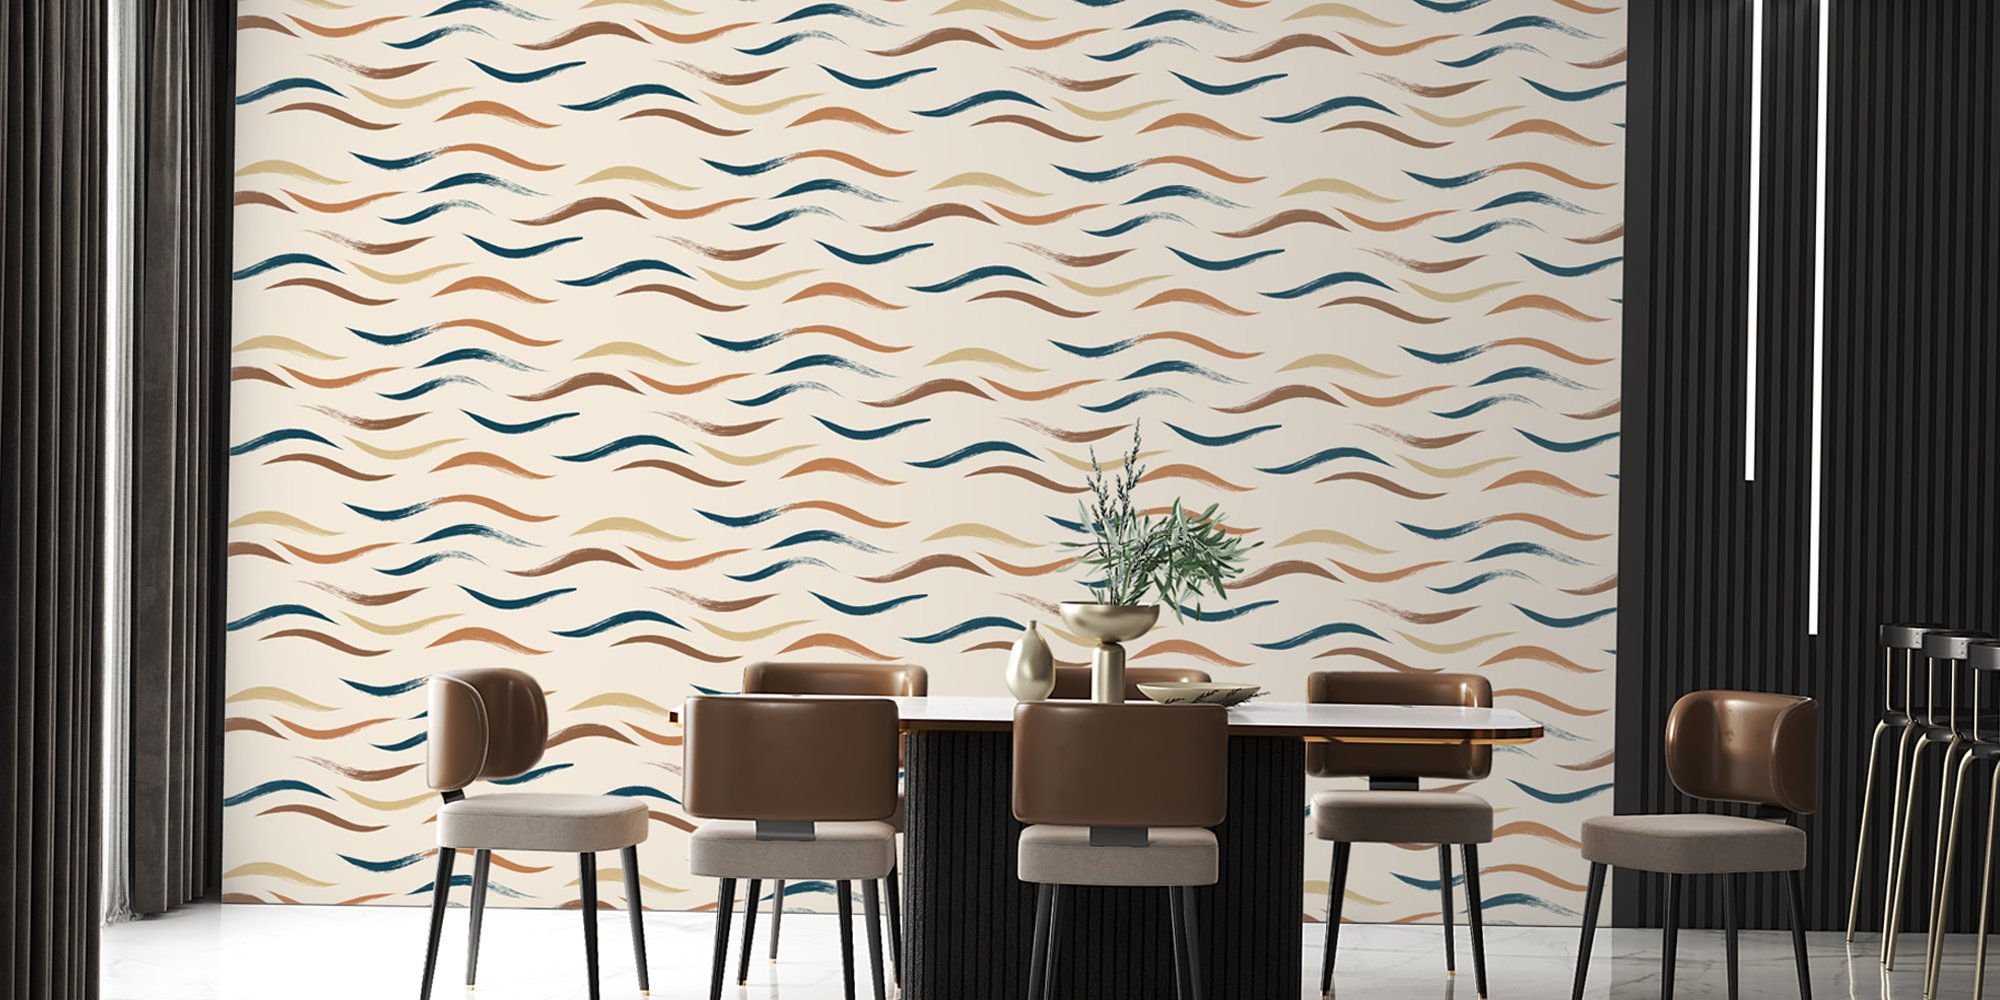 The Best Dining Room Wallpapers to Reflect Your Style